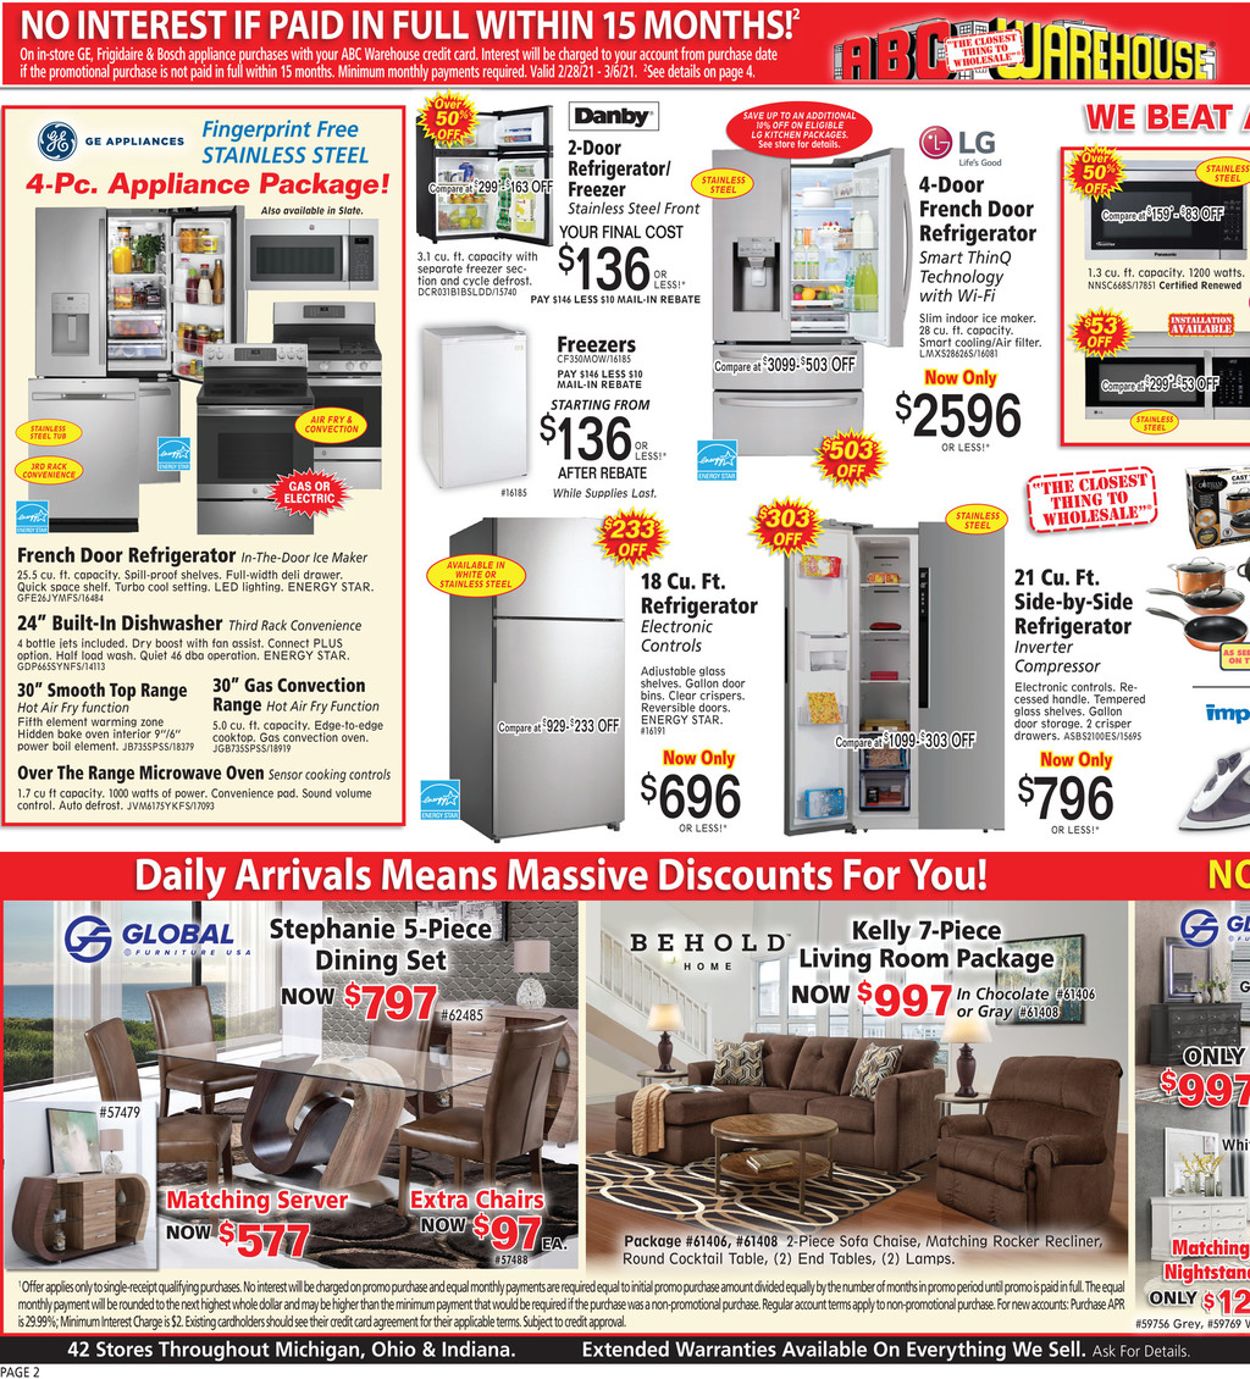 ABC Warehouse Ad from 02/28/2021